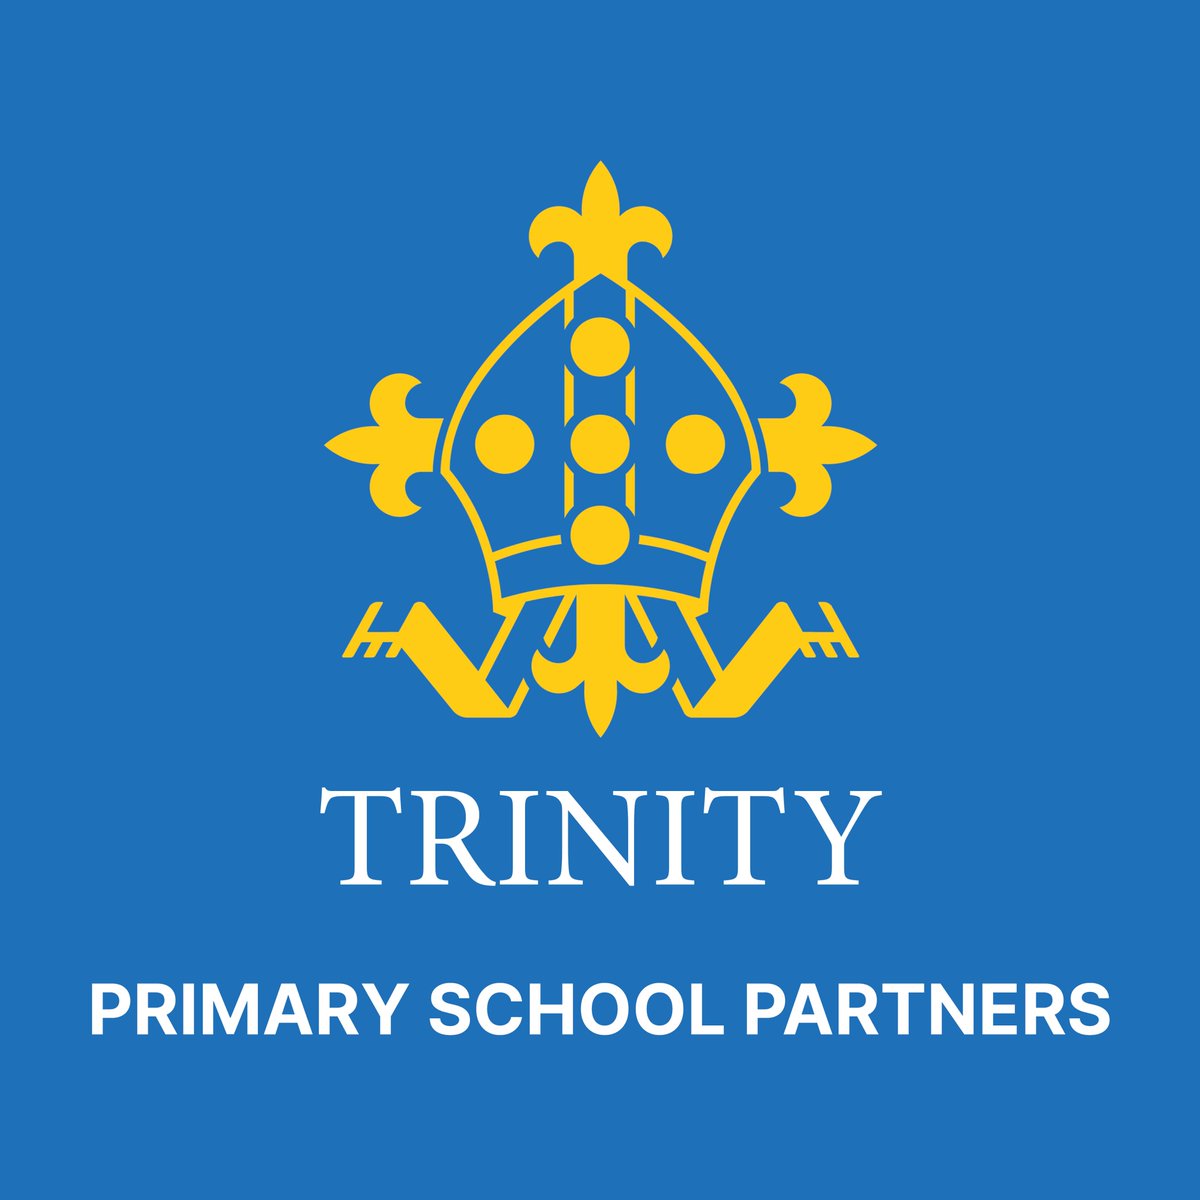 Trinity has always ensured, through a programme of bursaries, scholarships and local primary school outreach, that access to outstanding educational experiences is available to children from all backgrounds.  trinity-school.org/community/part… #TrinityPrimarySchoolPartners #TrinityCommunity